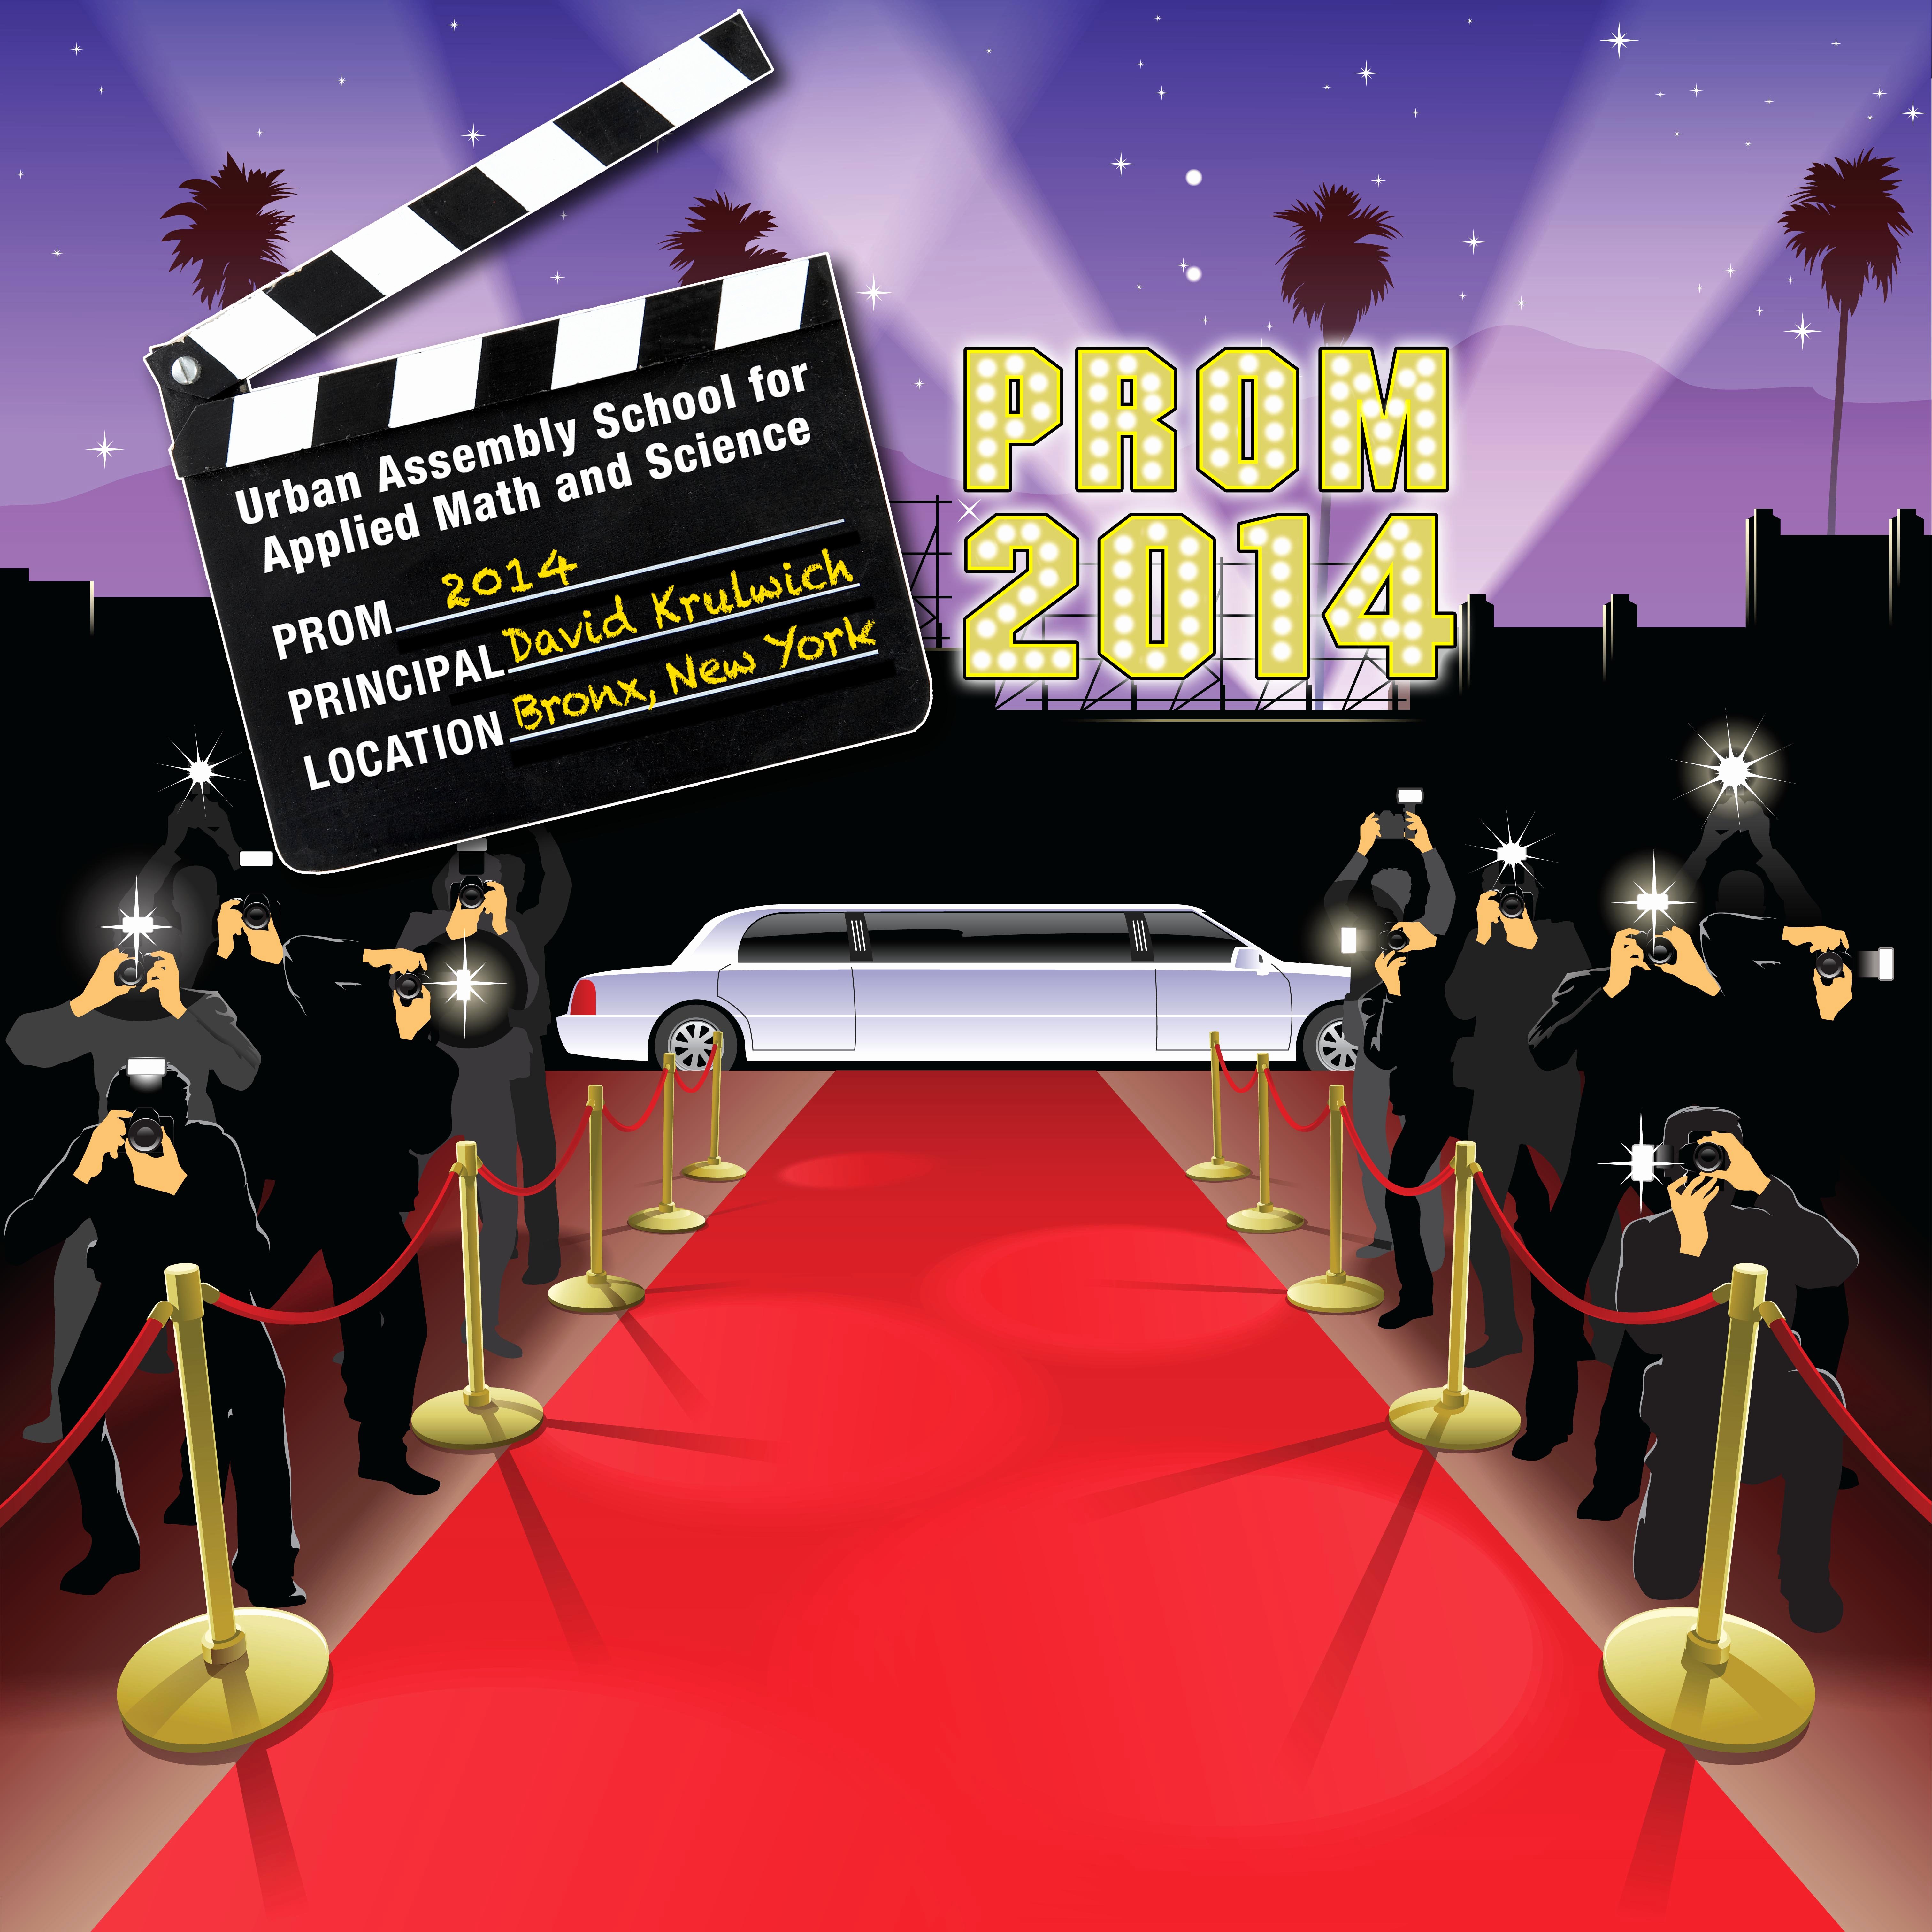 Red Carpet Backdrop Template Elegant Good Morning America Announces Prom Booth Surprise News